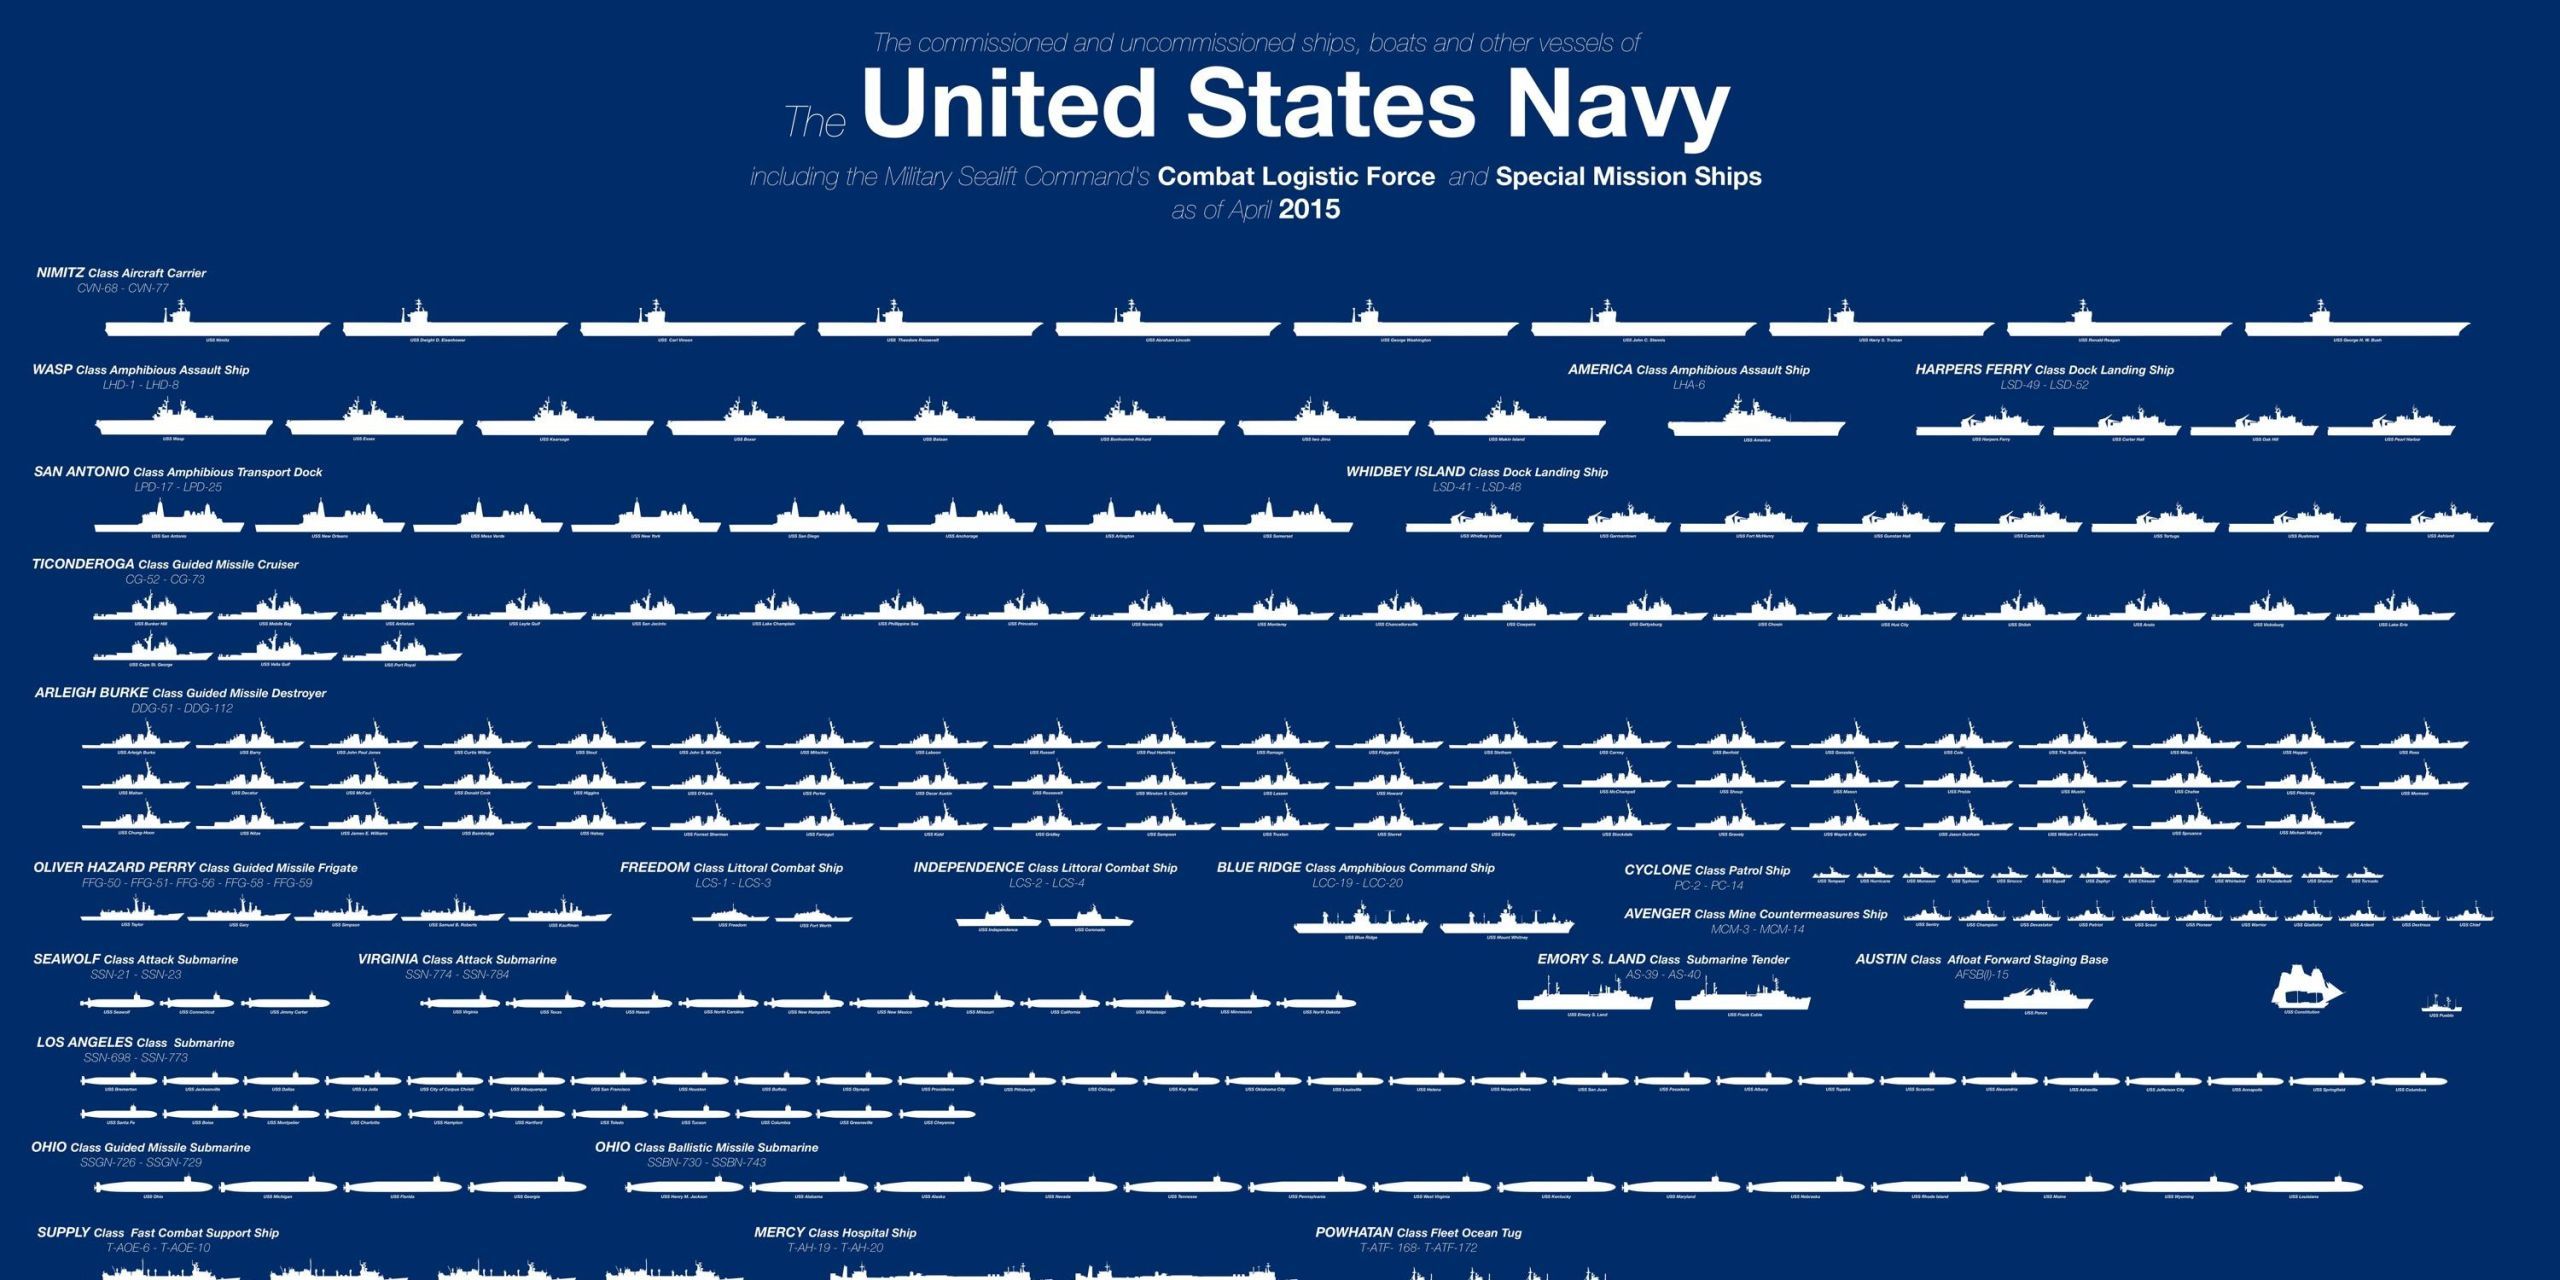 how many ships were in the american navy during the war of 1812